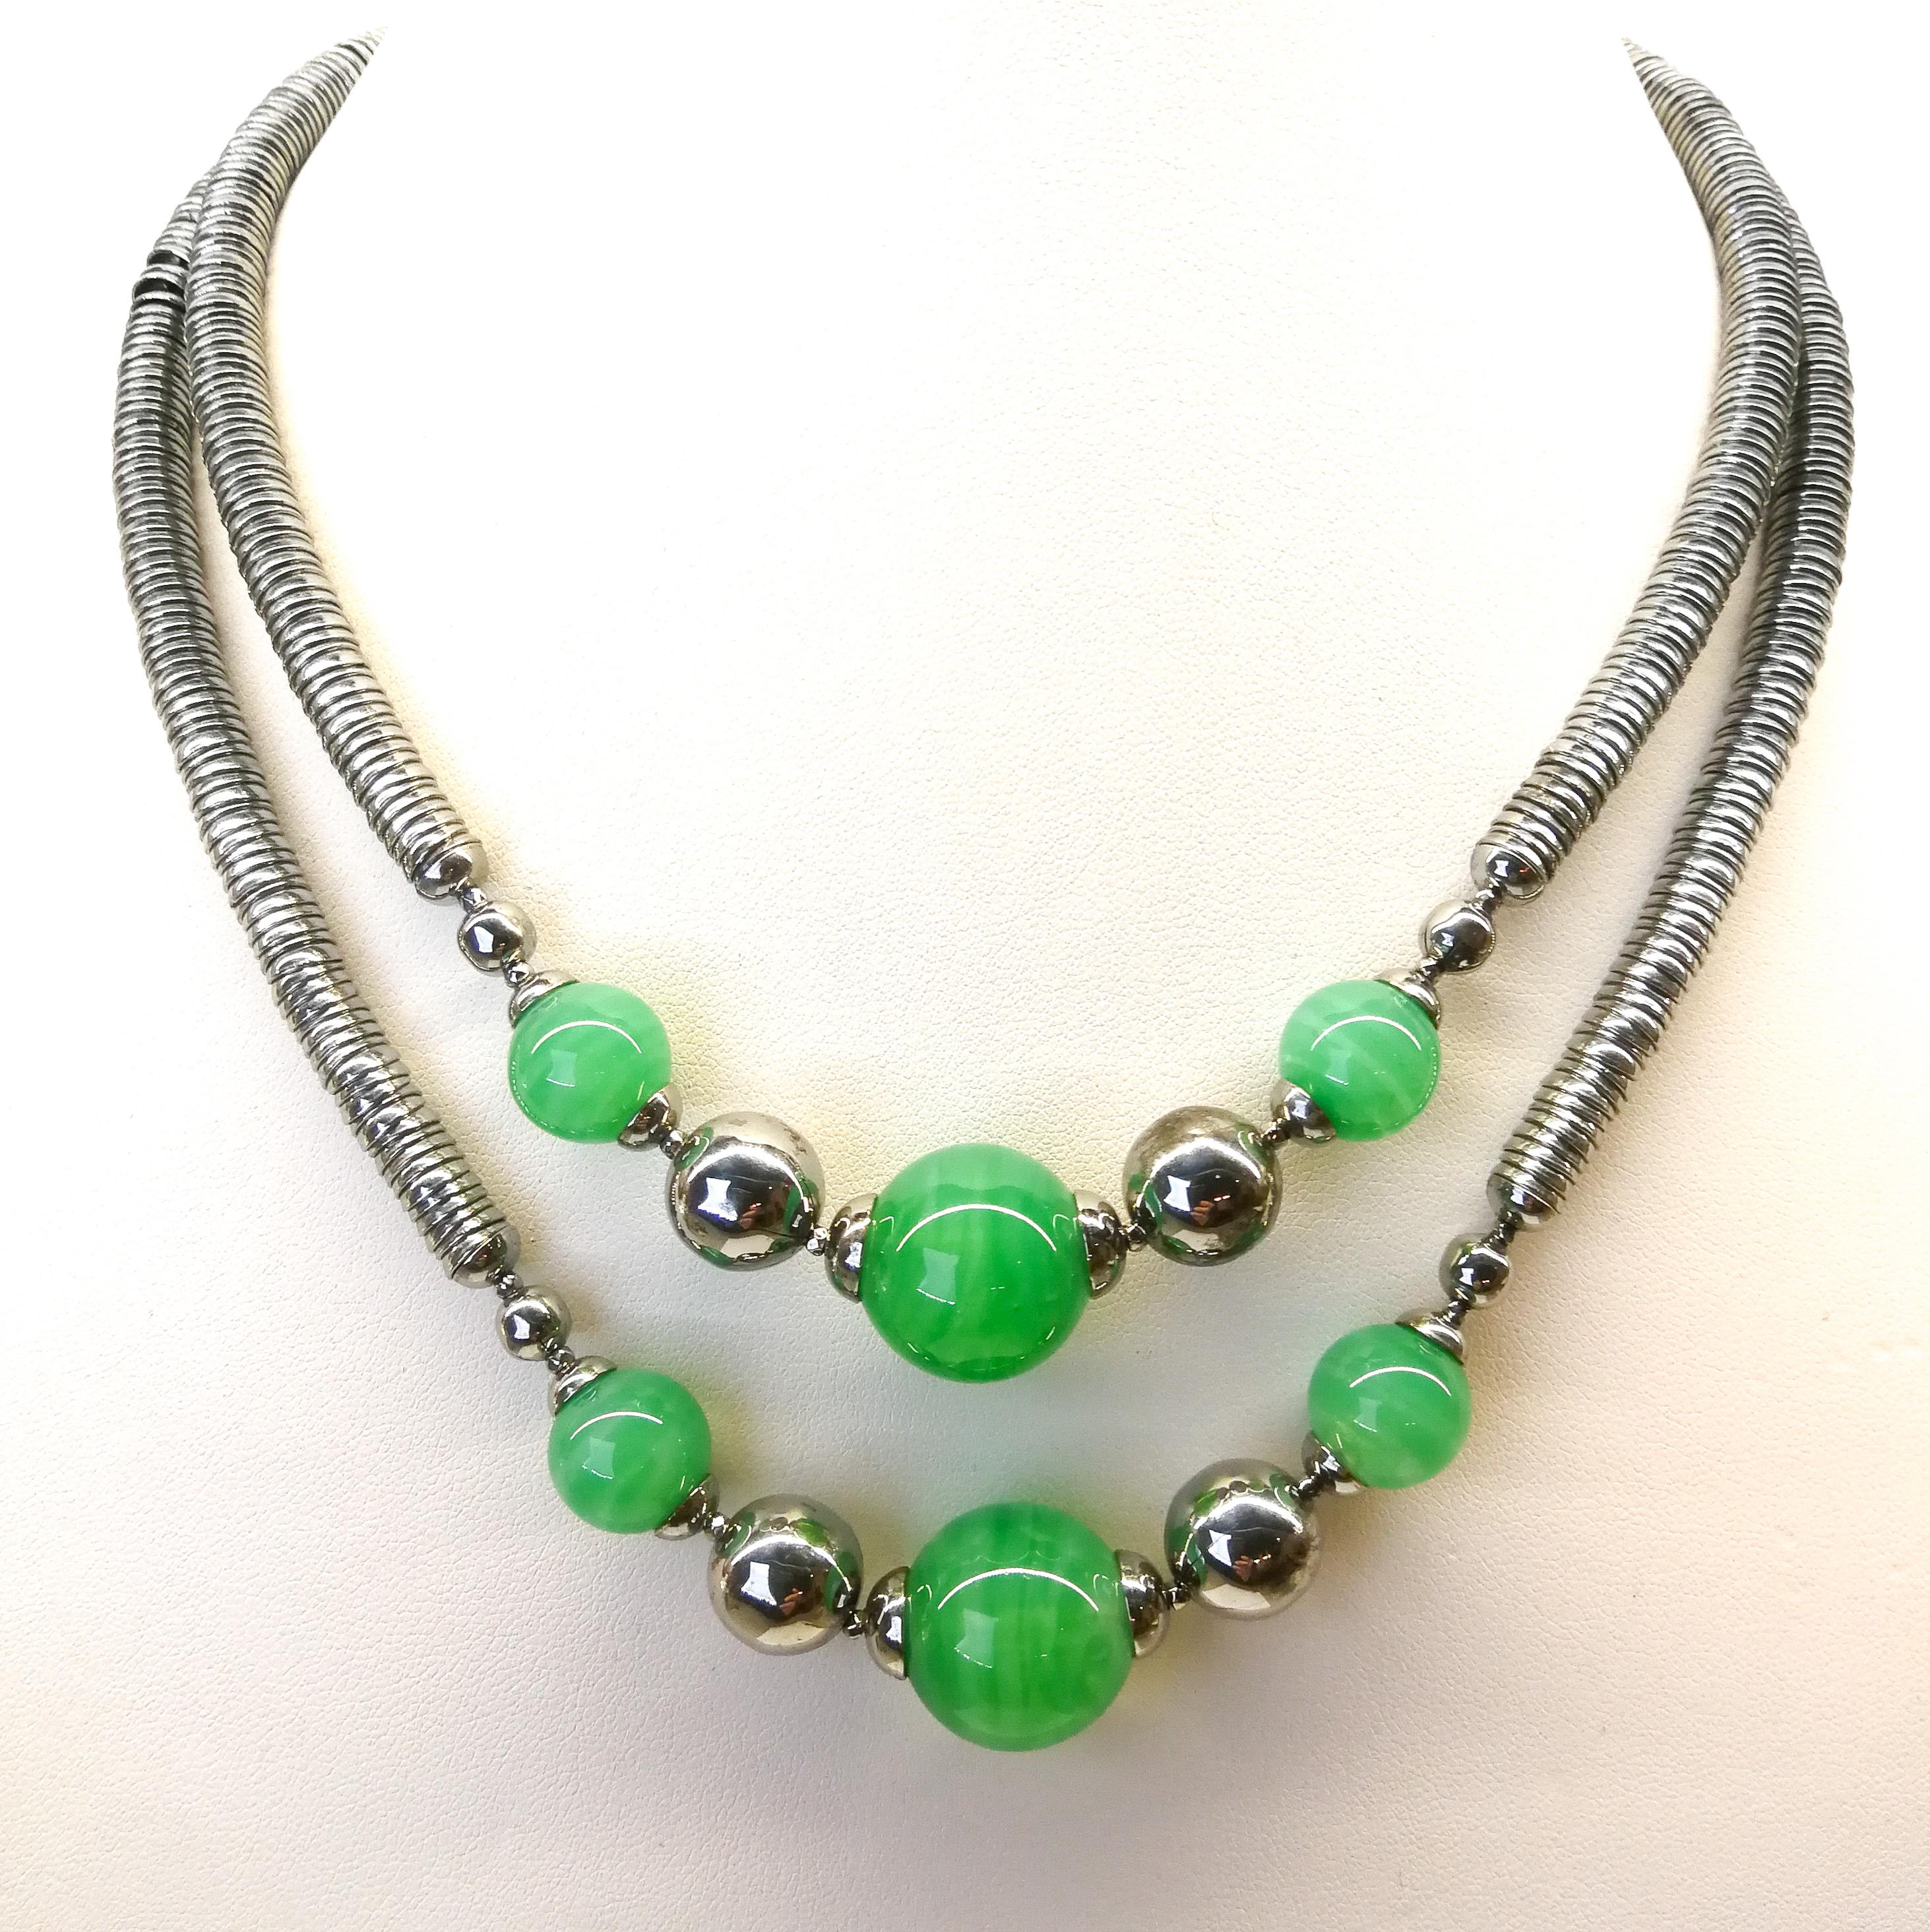 A classic Art Deco chrome and glass bead two row necklace, made from small chrome metal 'cups', fitting one inside another , to create a very fluid and sensual necklace, in feel. Six ;marbled' green glass beads, of varying sizes, adorn the front of